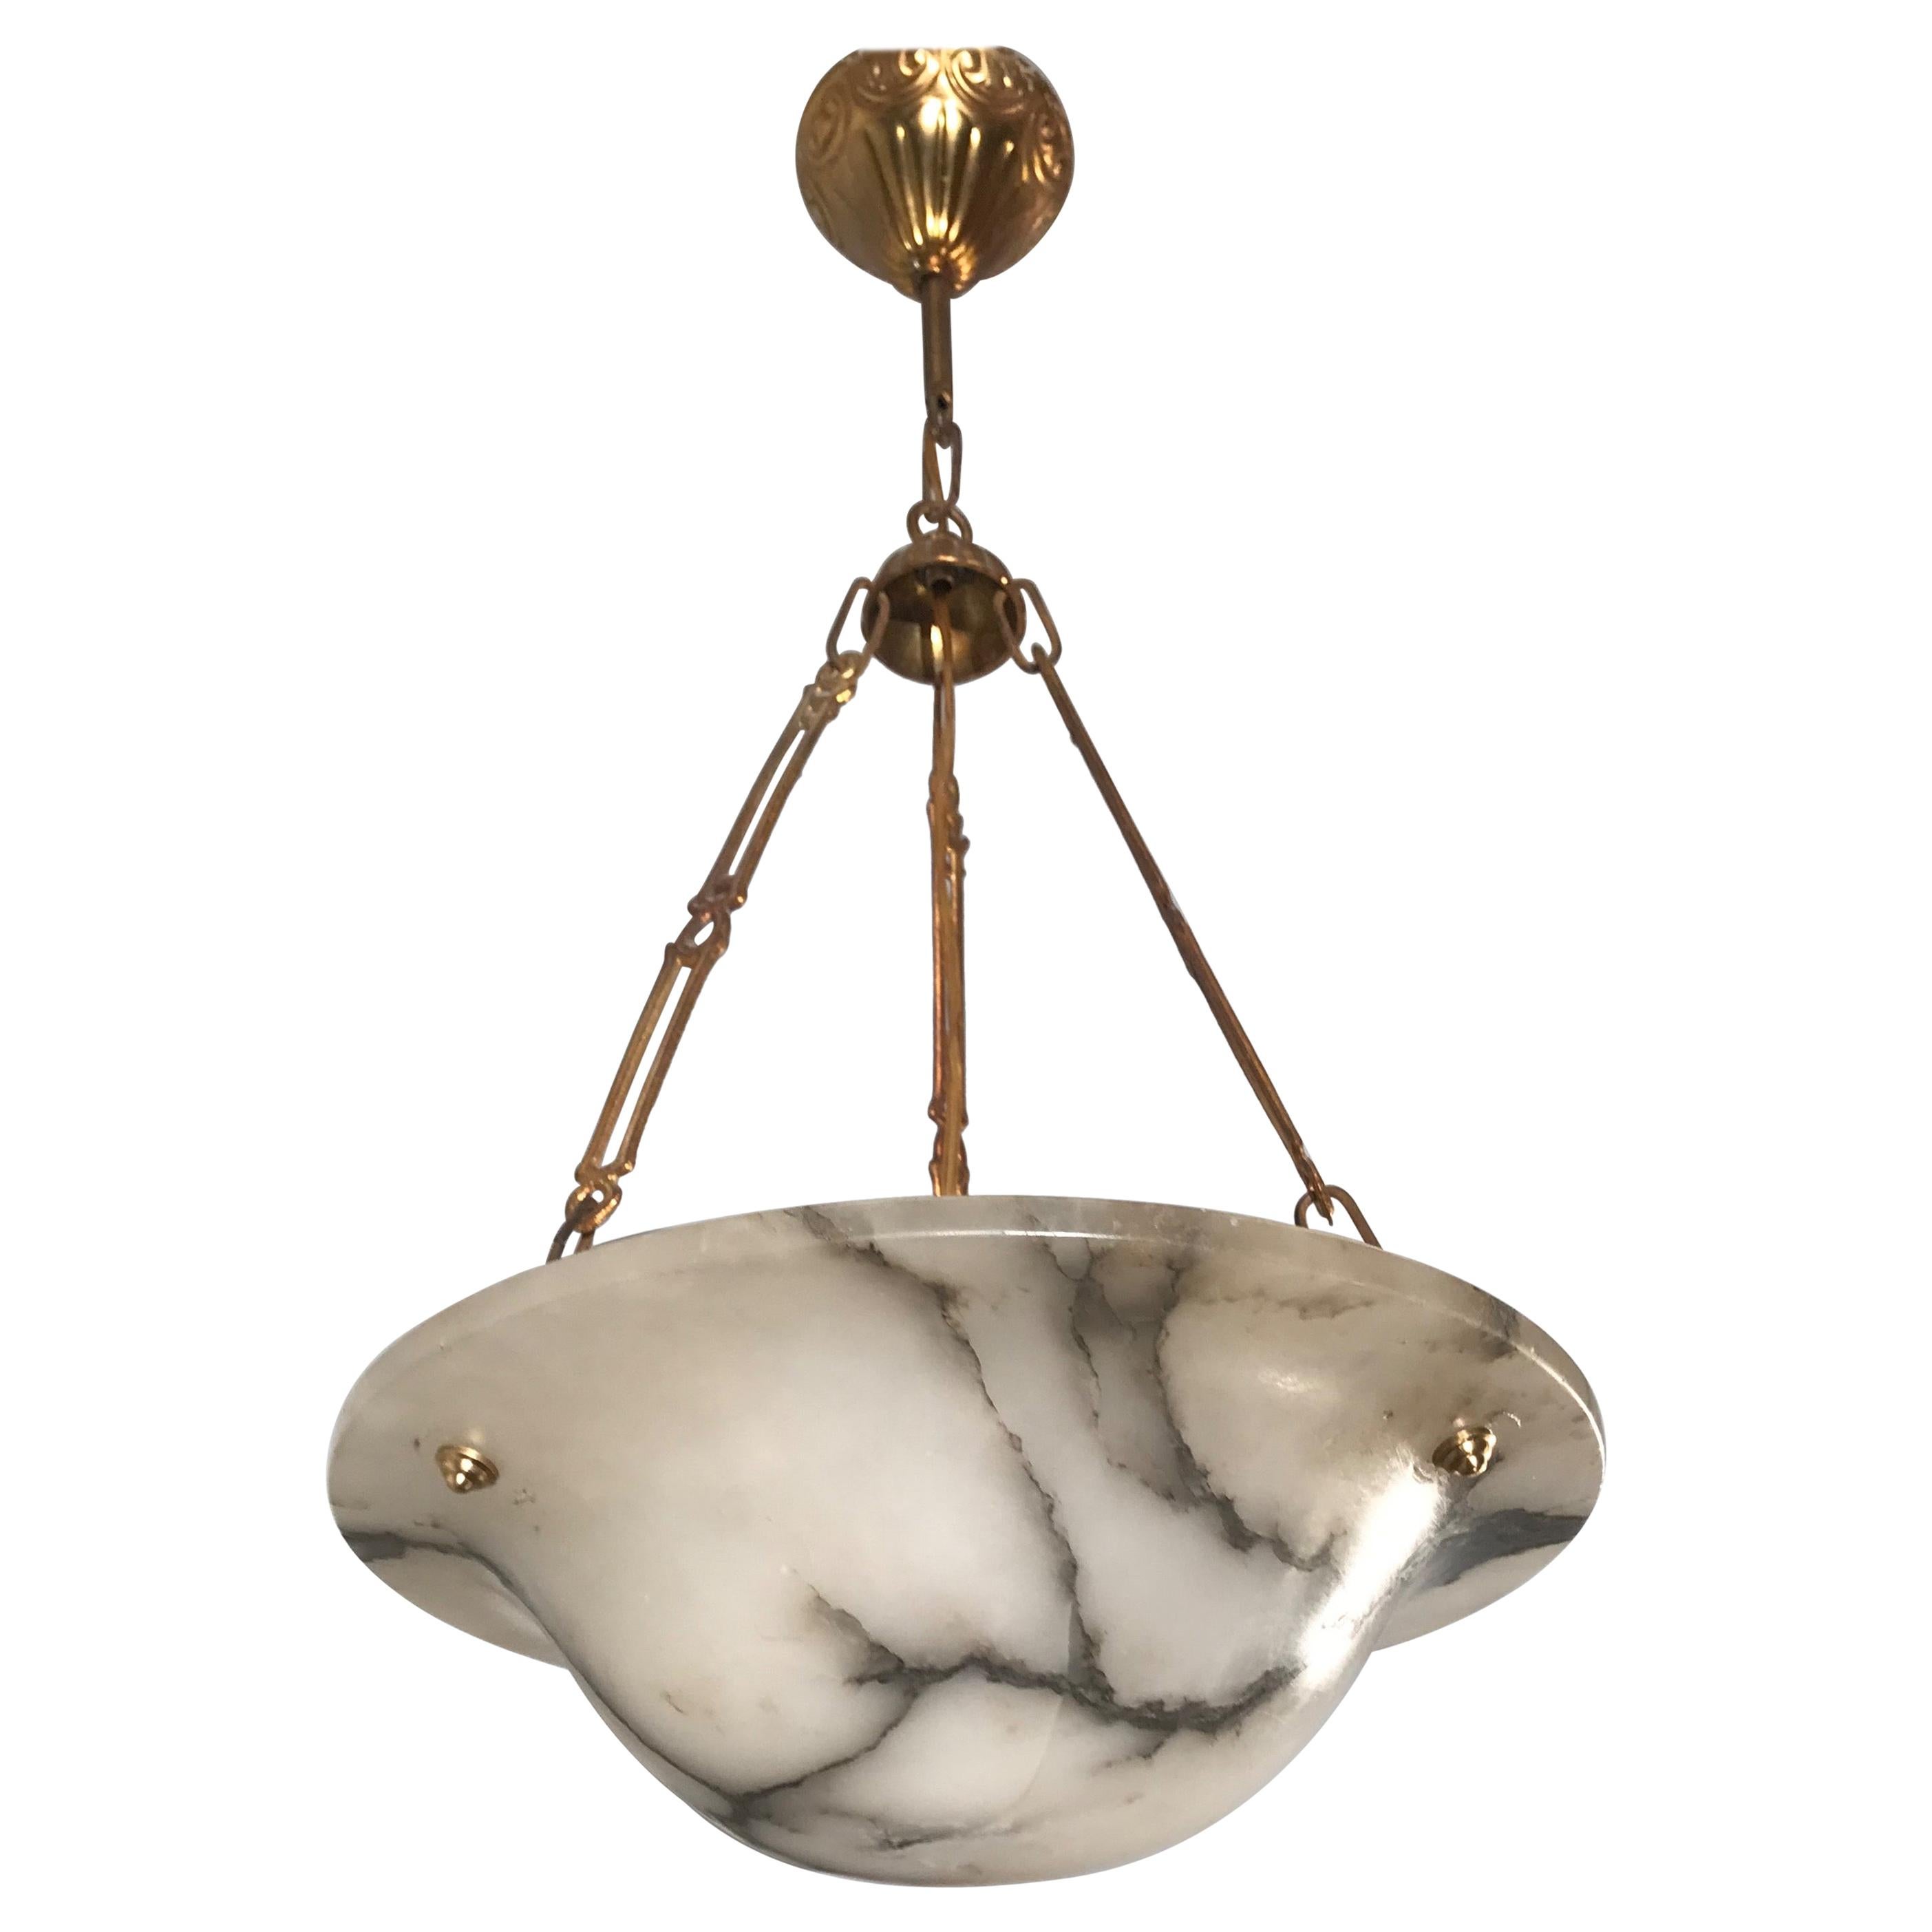 Small Art Deco Alabaster Pendant Light with White & Black Veins & Stunning Chain